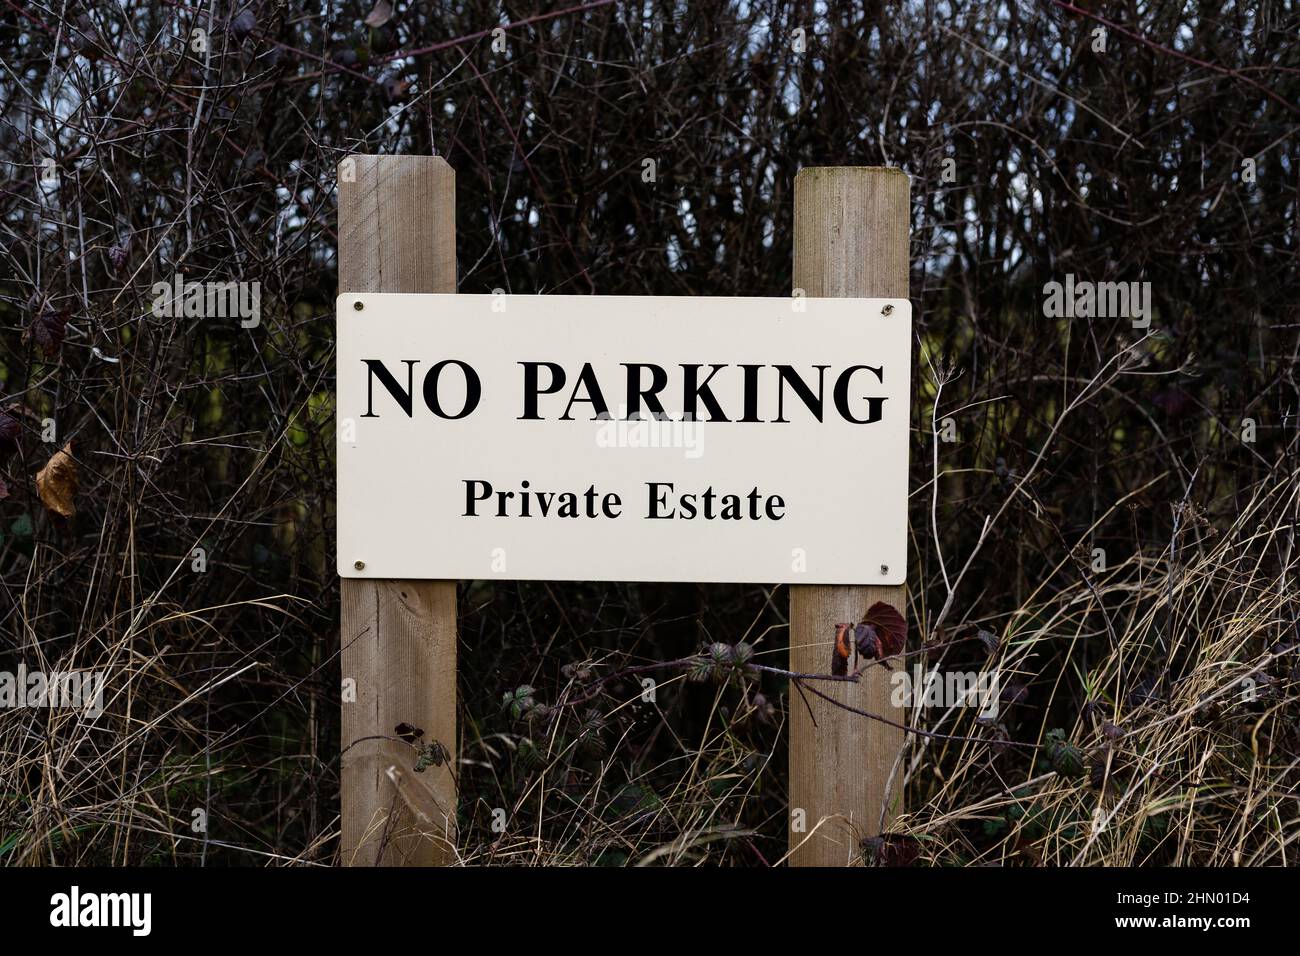 A sign warning the public that there is no parking due to the area being a private estate Stock Photo